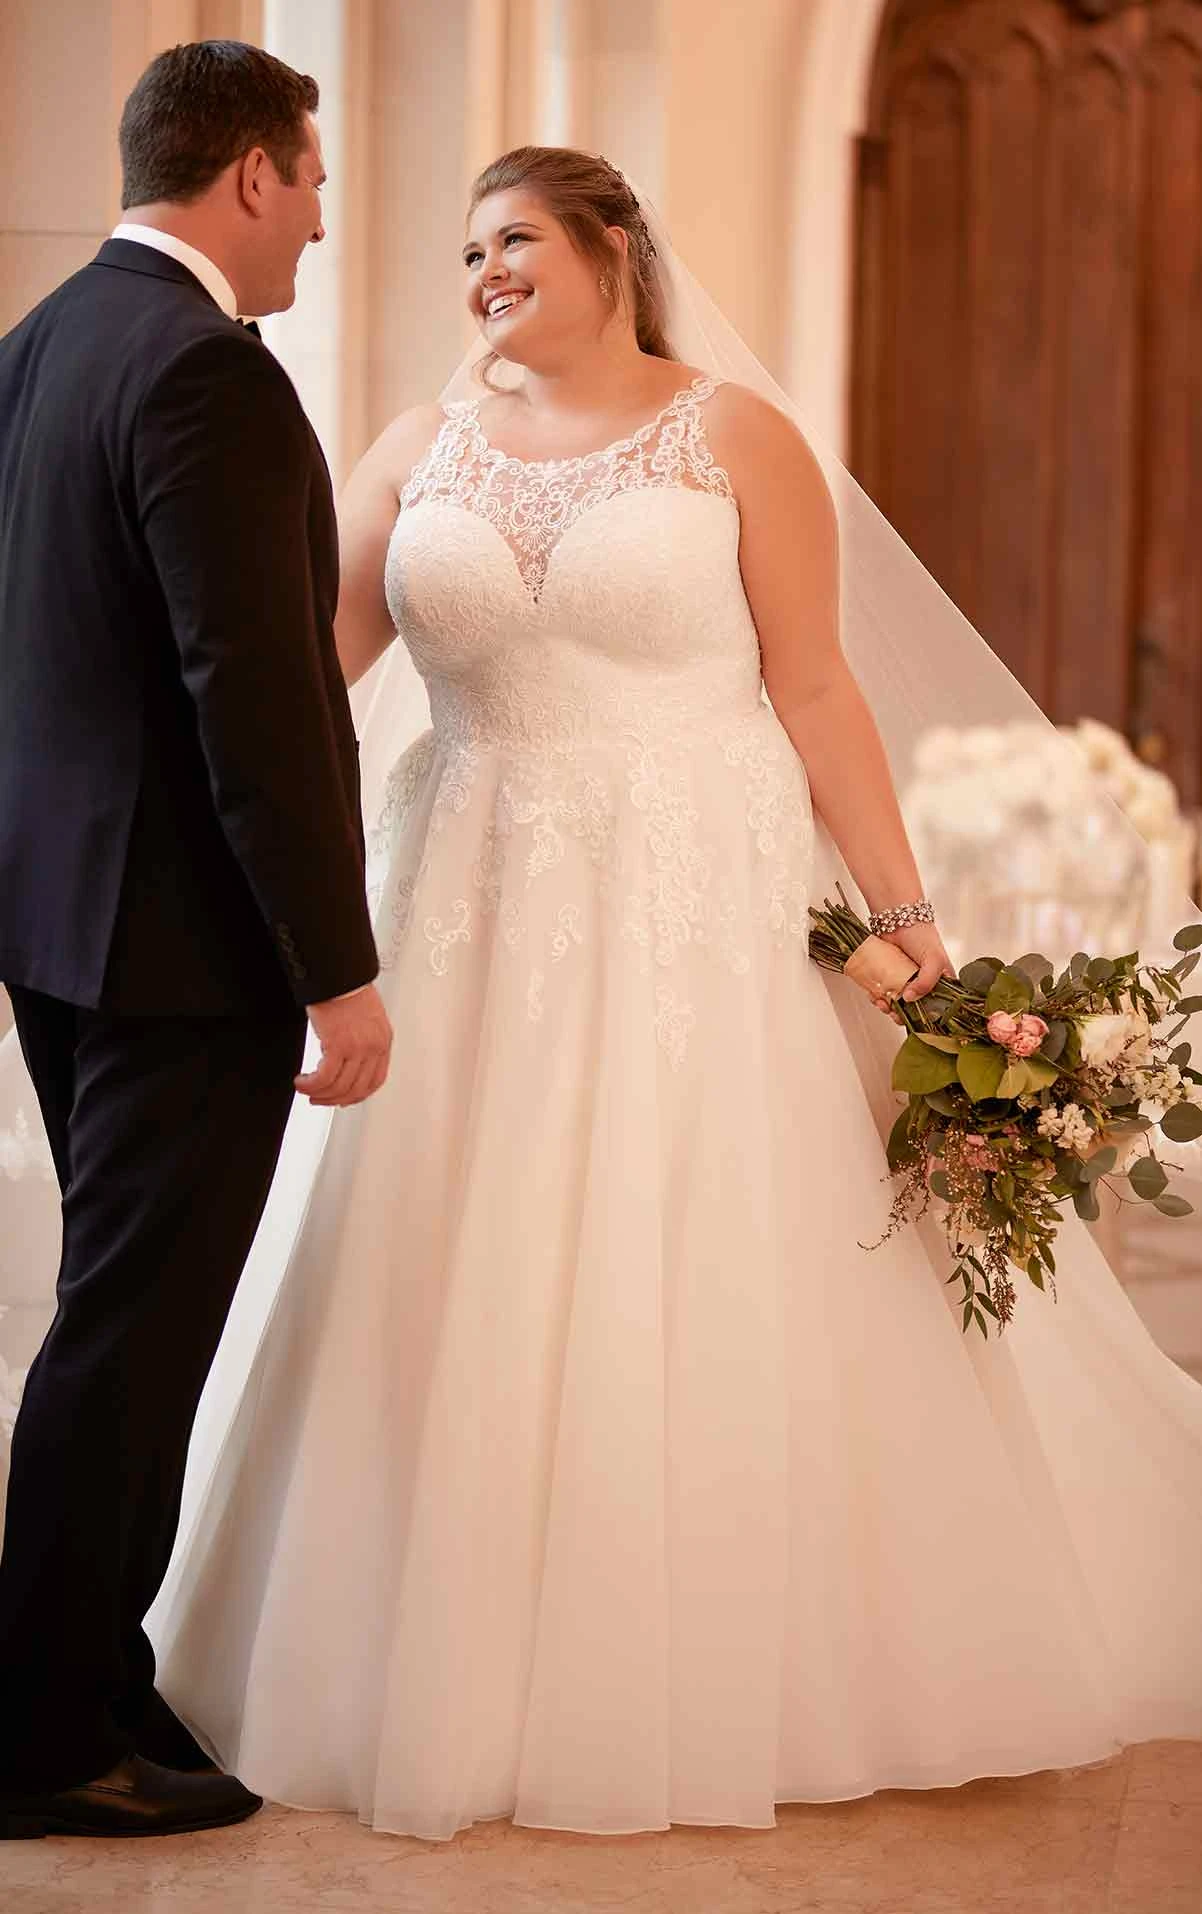 Stunning Plus Size Bride In A Corset Dress With Long Sleeves V Neck And A Chiffone Skirt Plus Wedding Dresses Wedding Dresses Lace Wedding Dress Long Sleeve